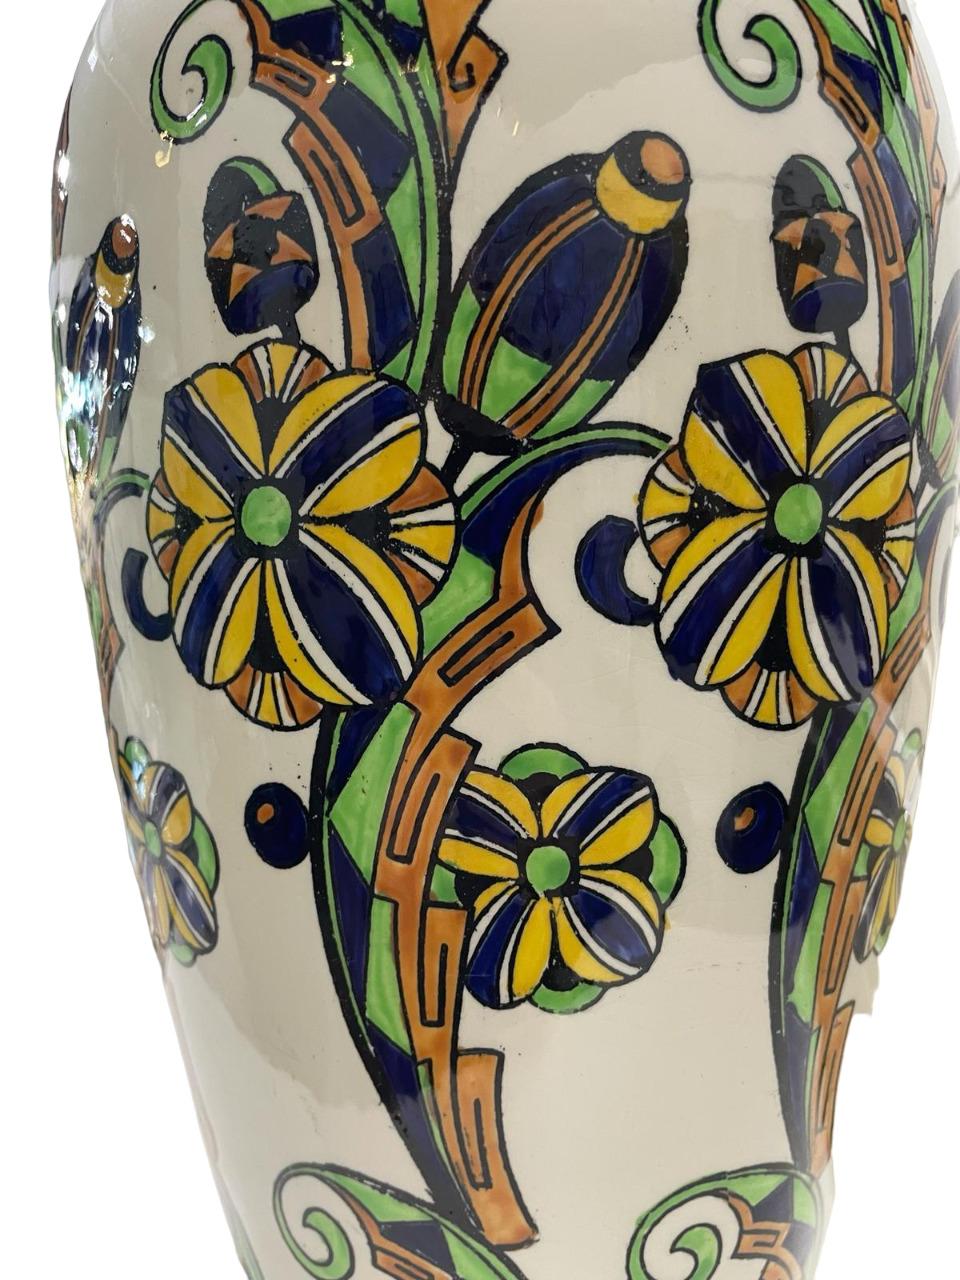 ART DECO LARGE Charles Catteau for Boch Keramis Vase circa 1927 For Sale 2